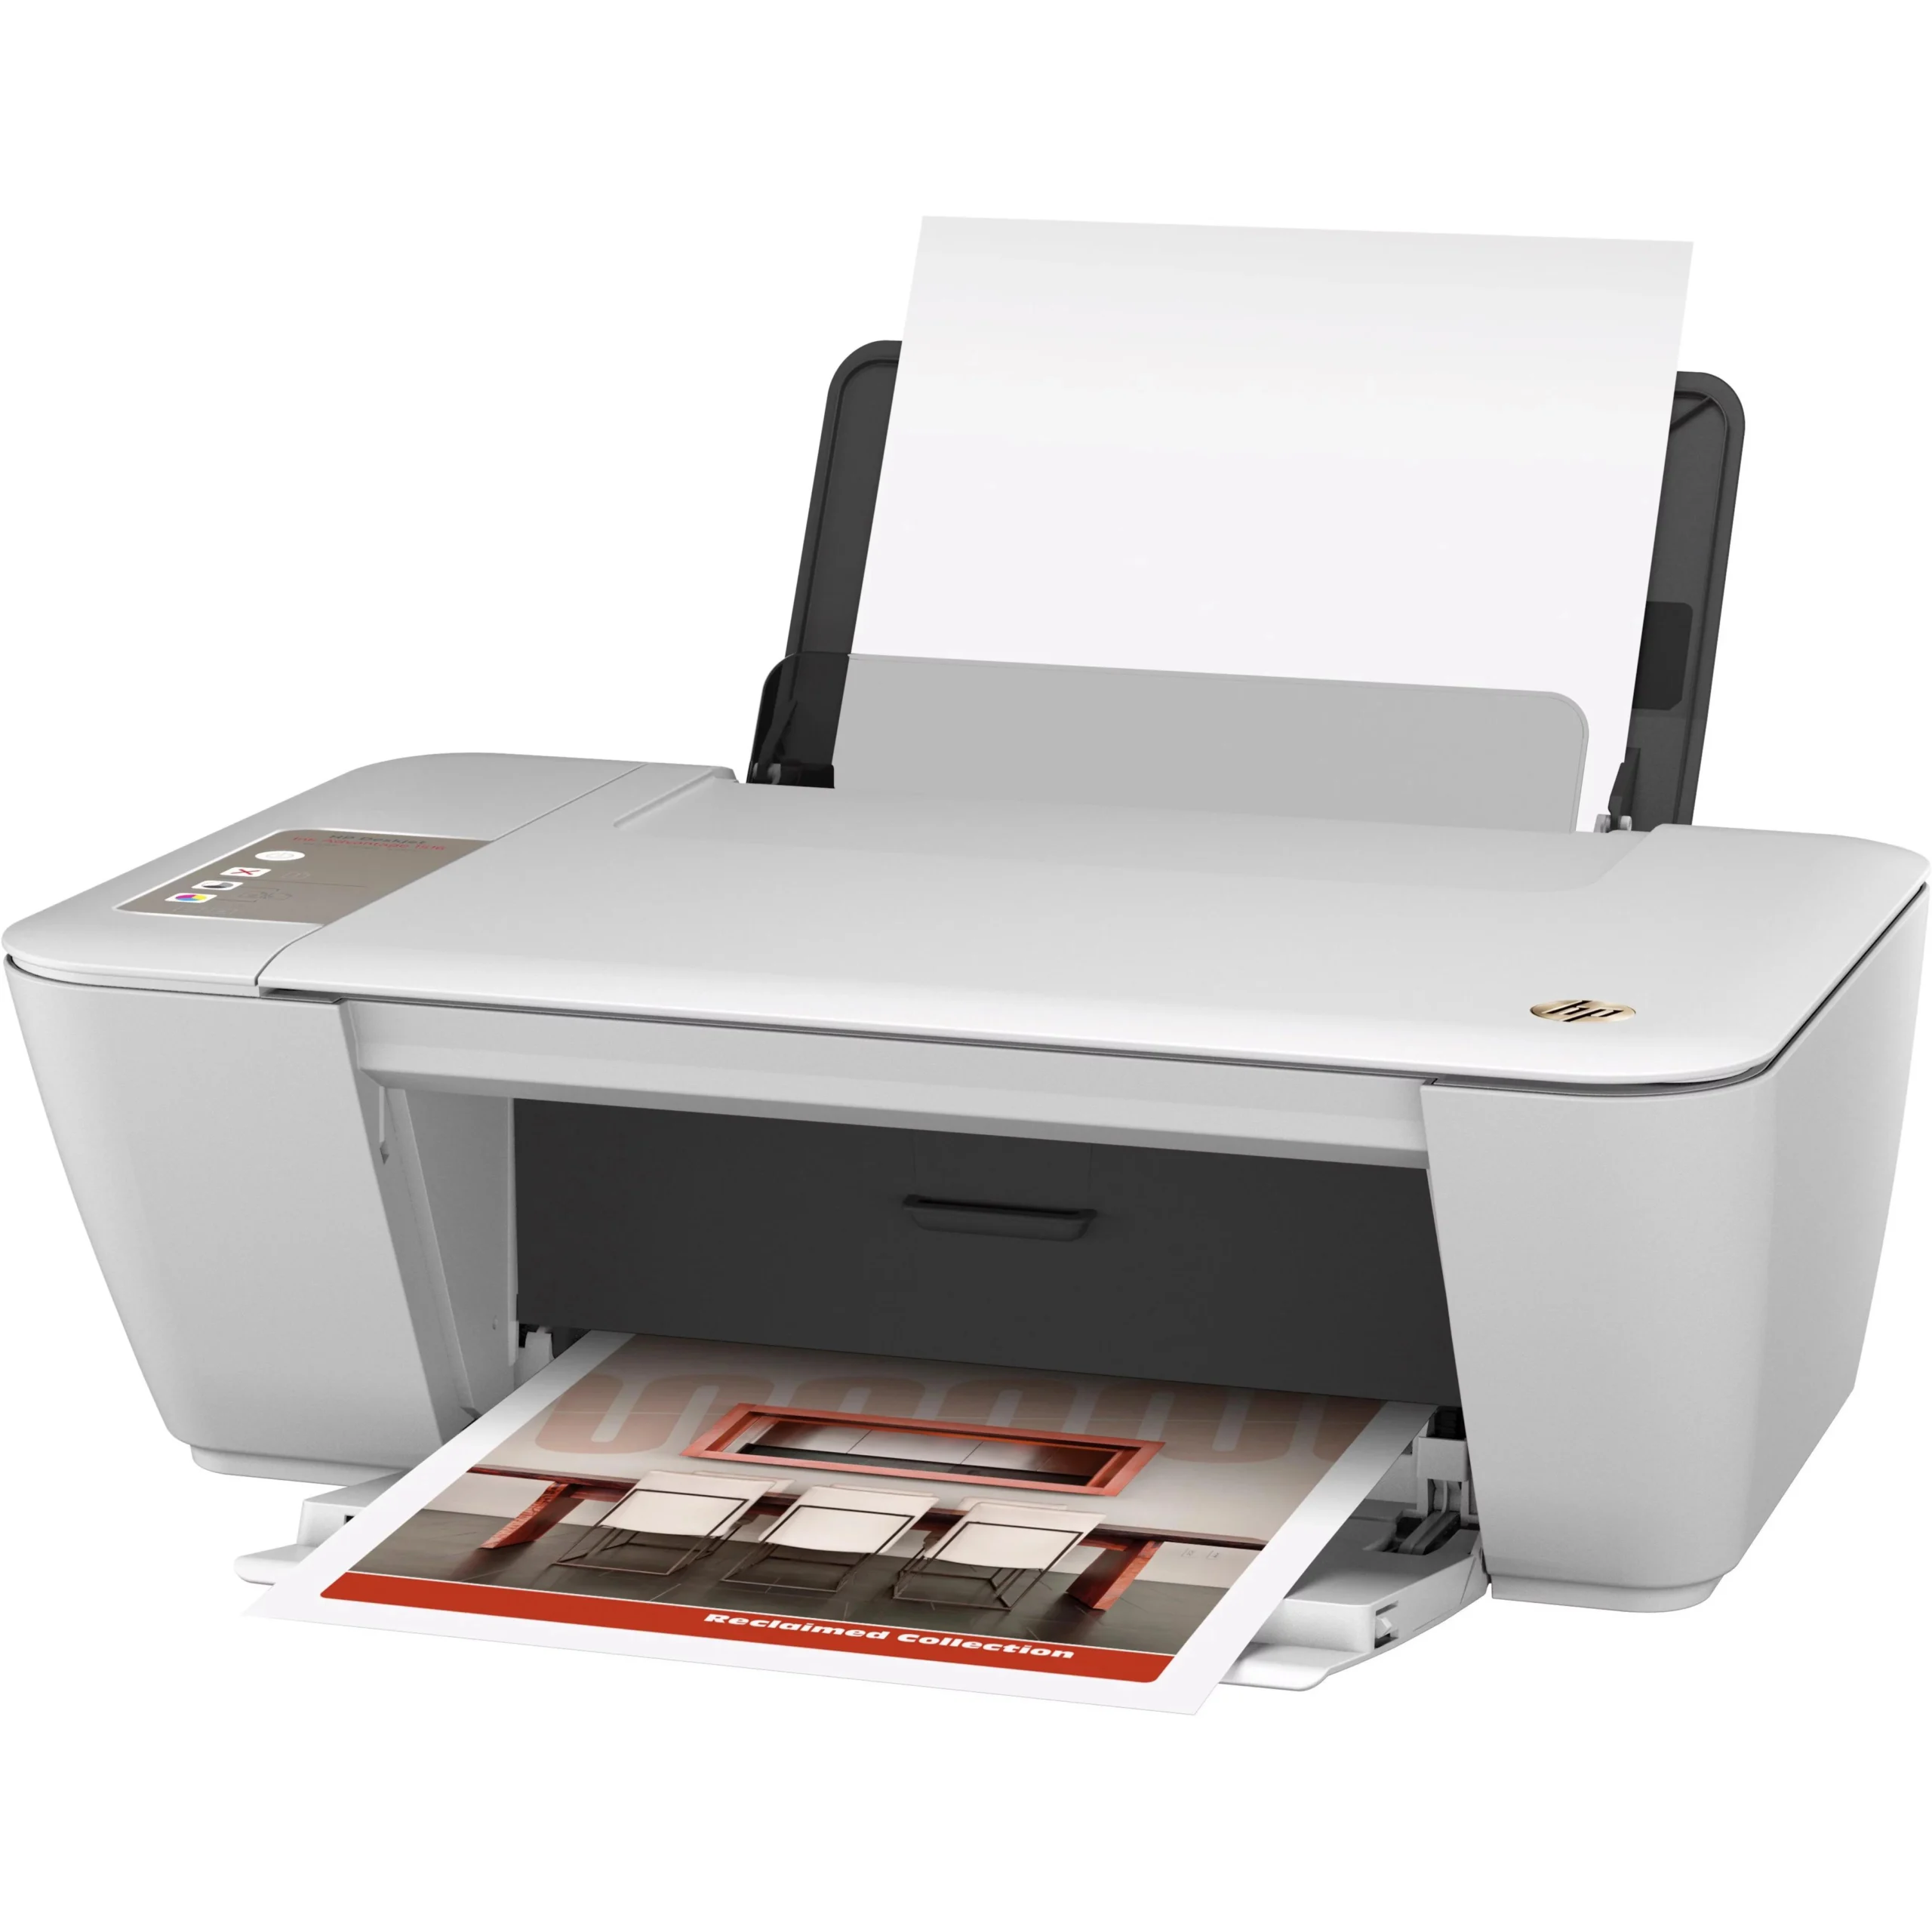 Wireless printing with hp deskjet 2542: features, setup, and cartridges